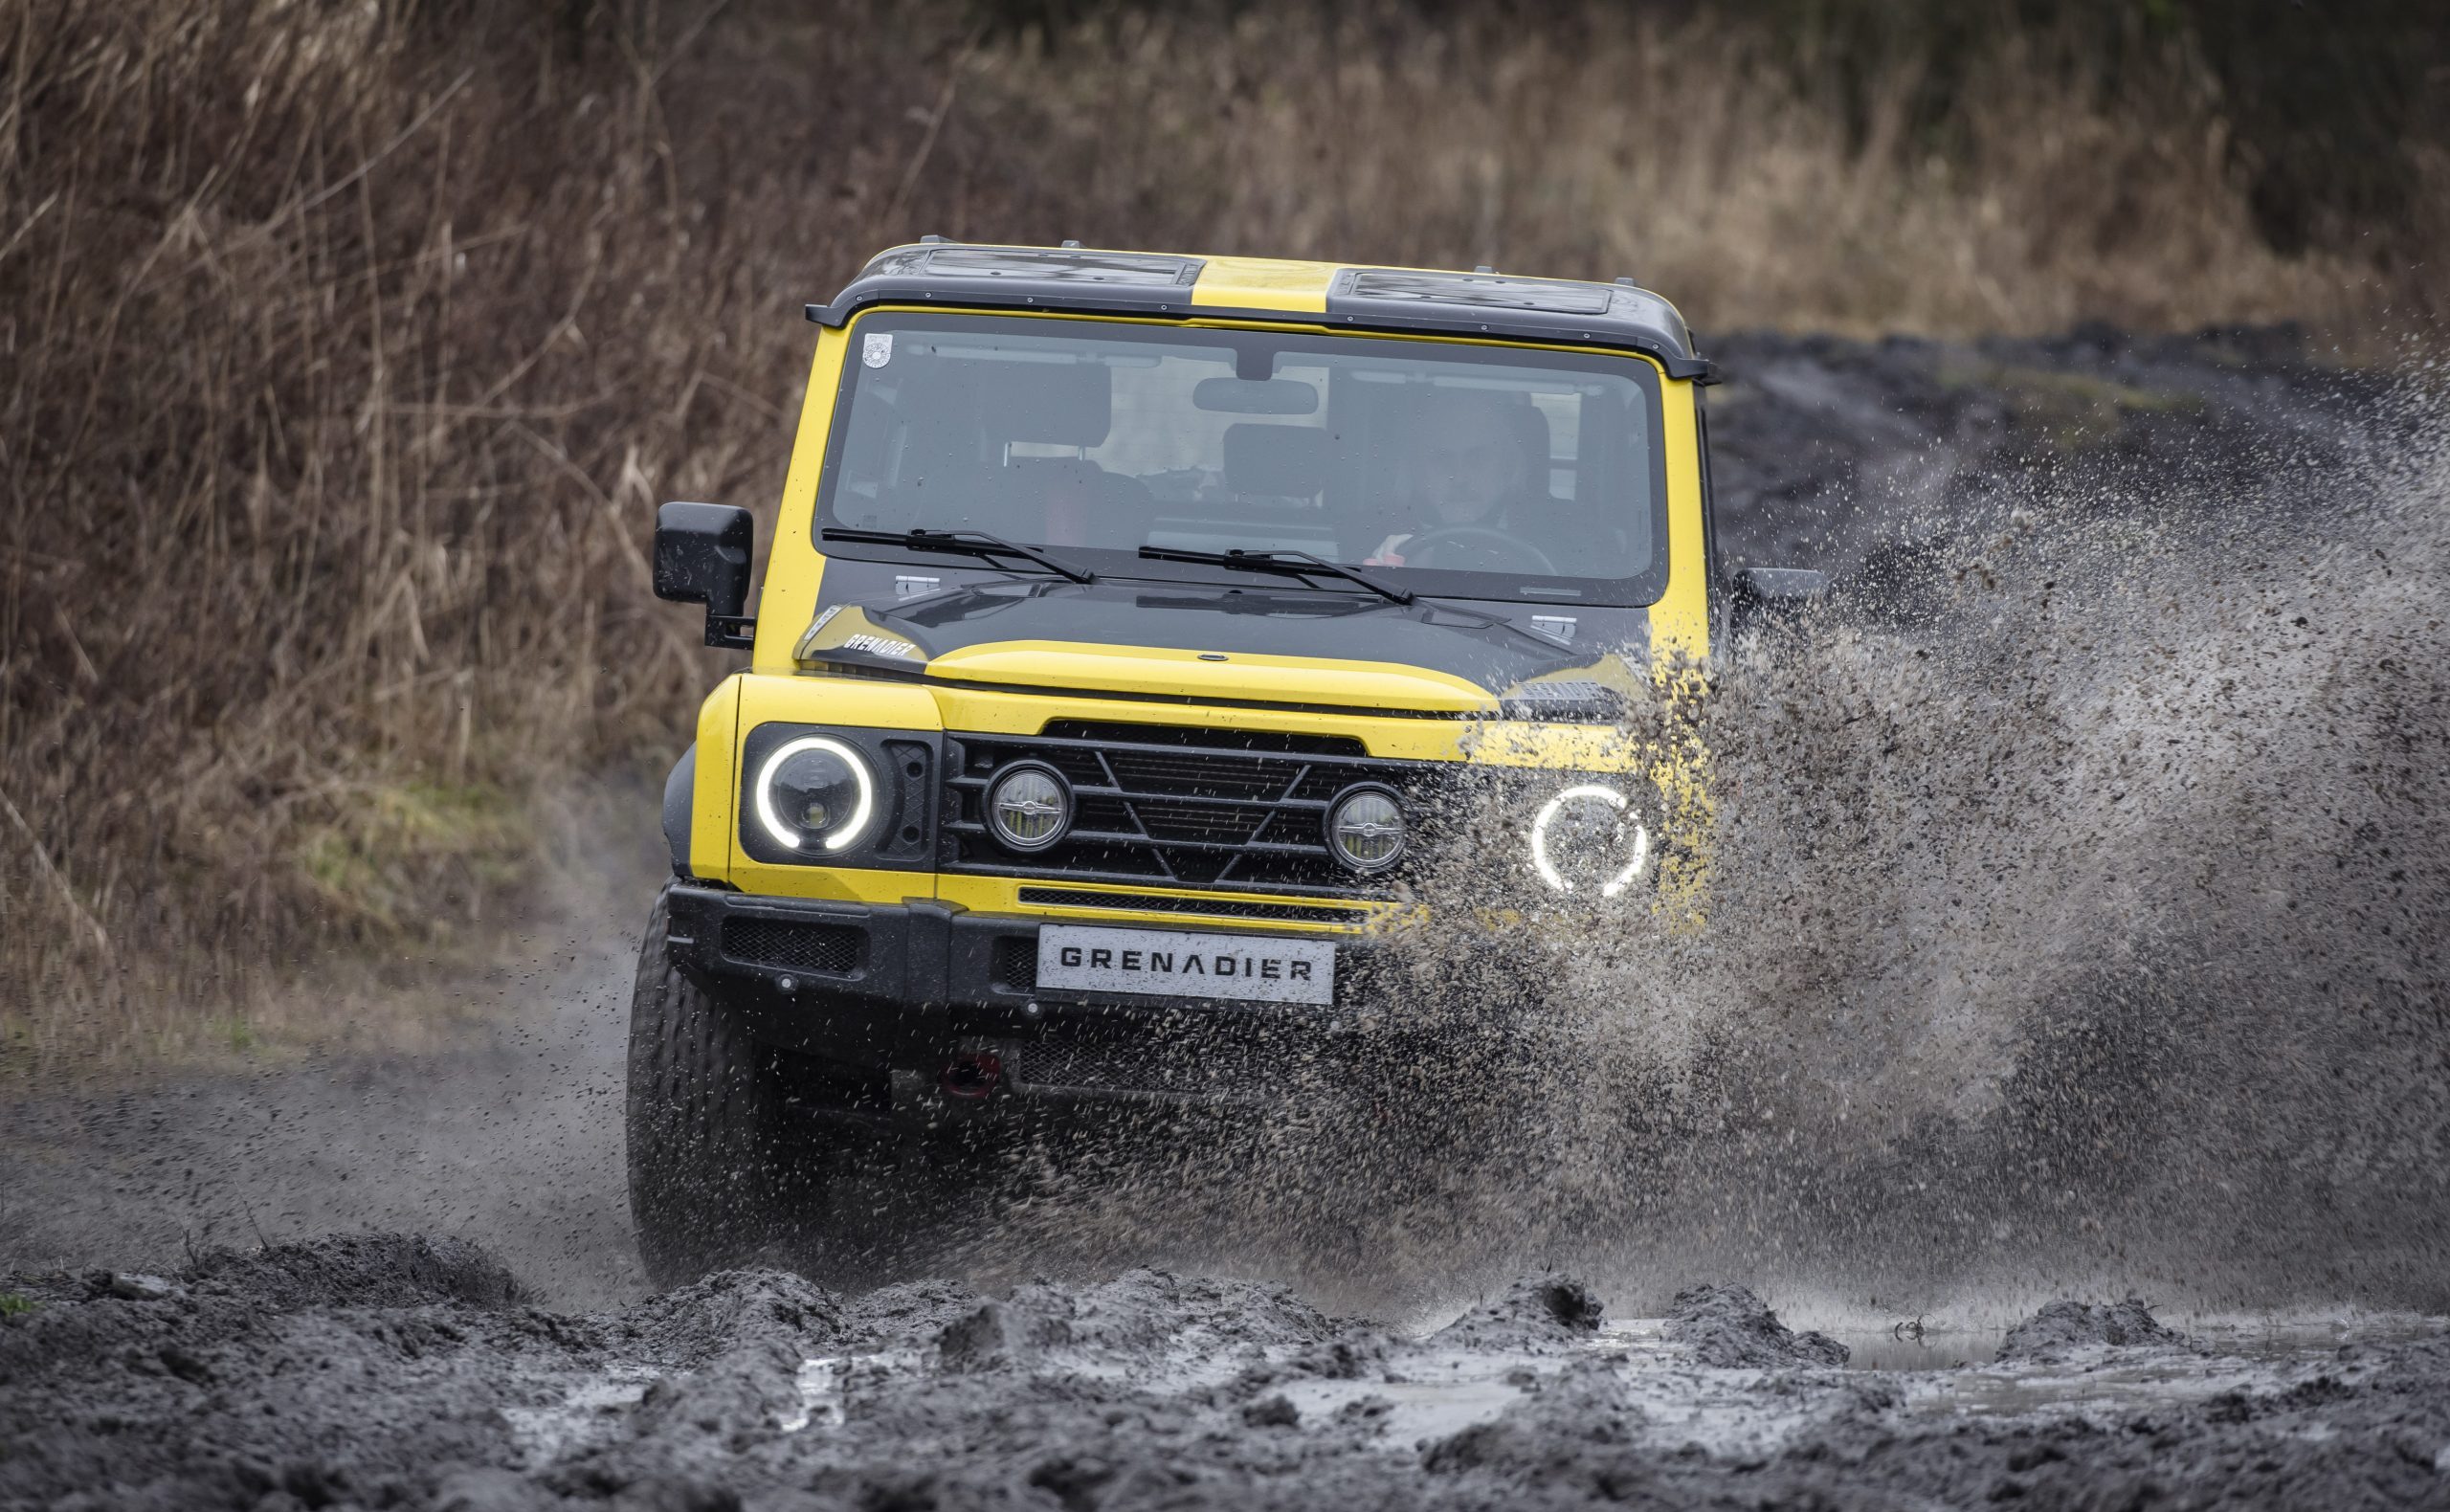 Ineos Grenadier review: Splashdown! The new 4×4 is made of tough stuff